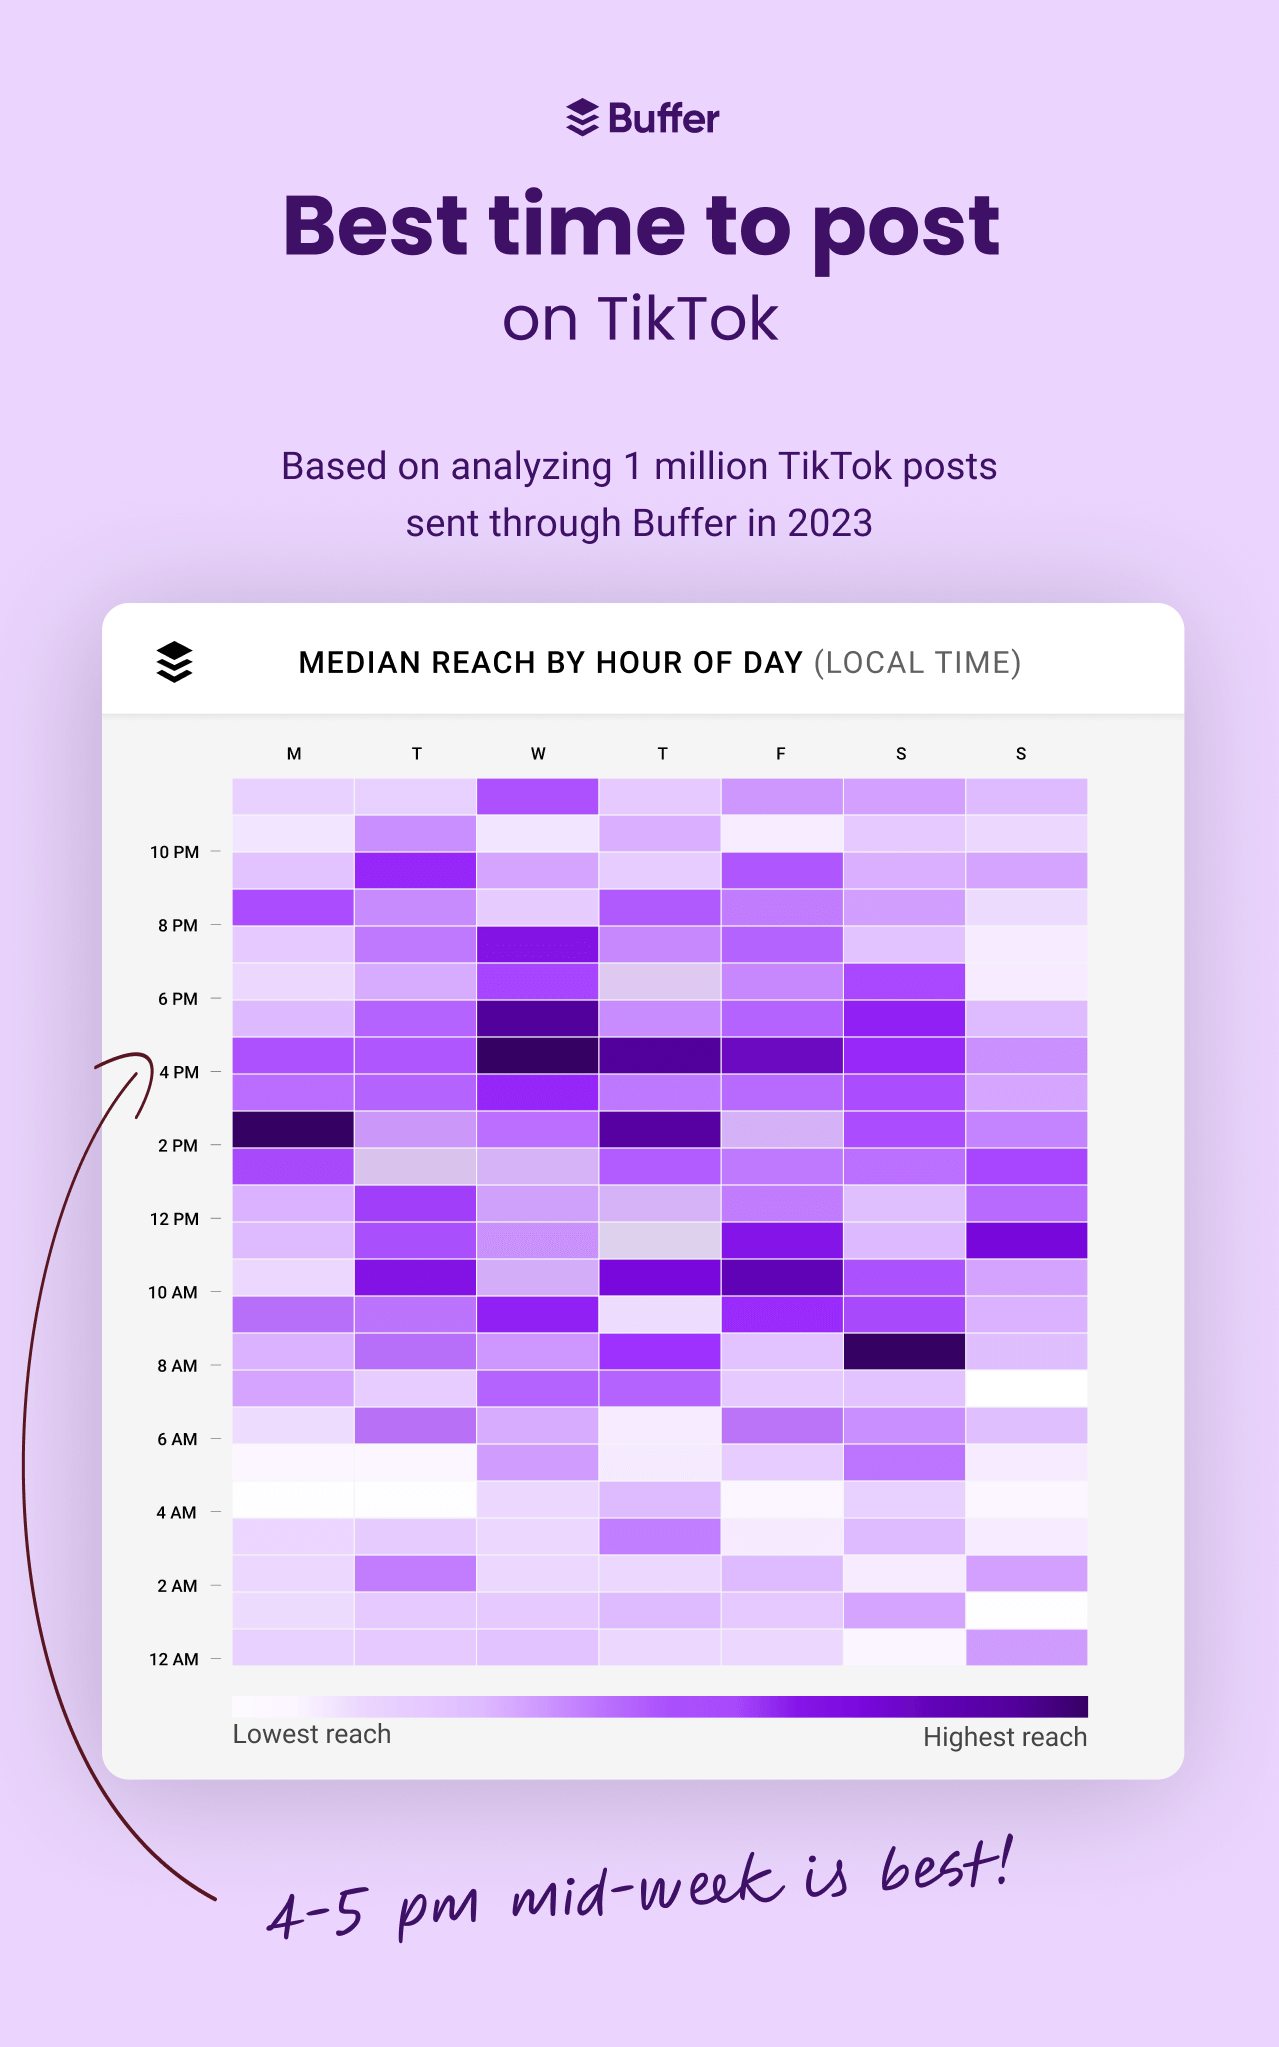 A graph showing the best times to post on TikTok